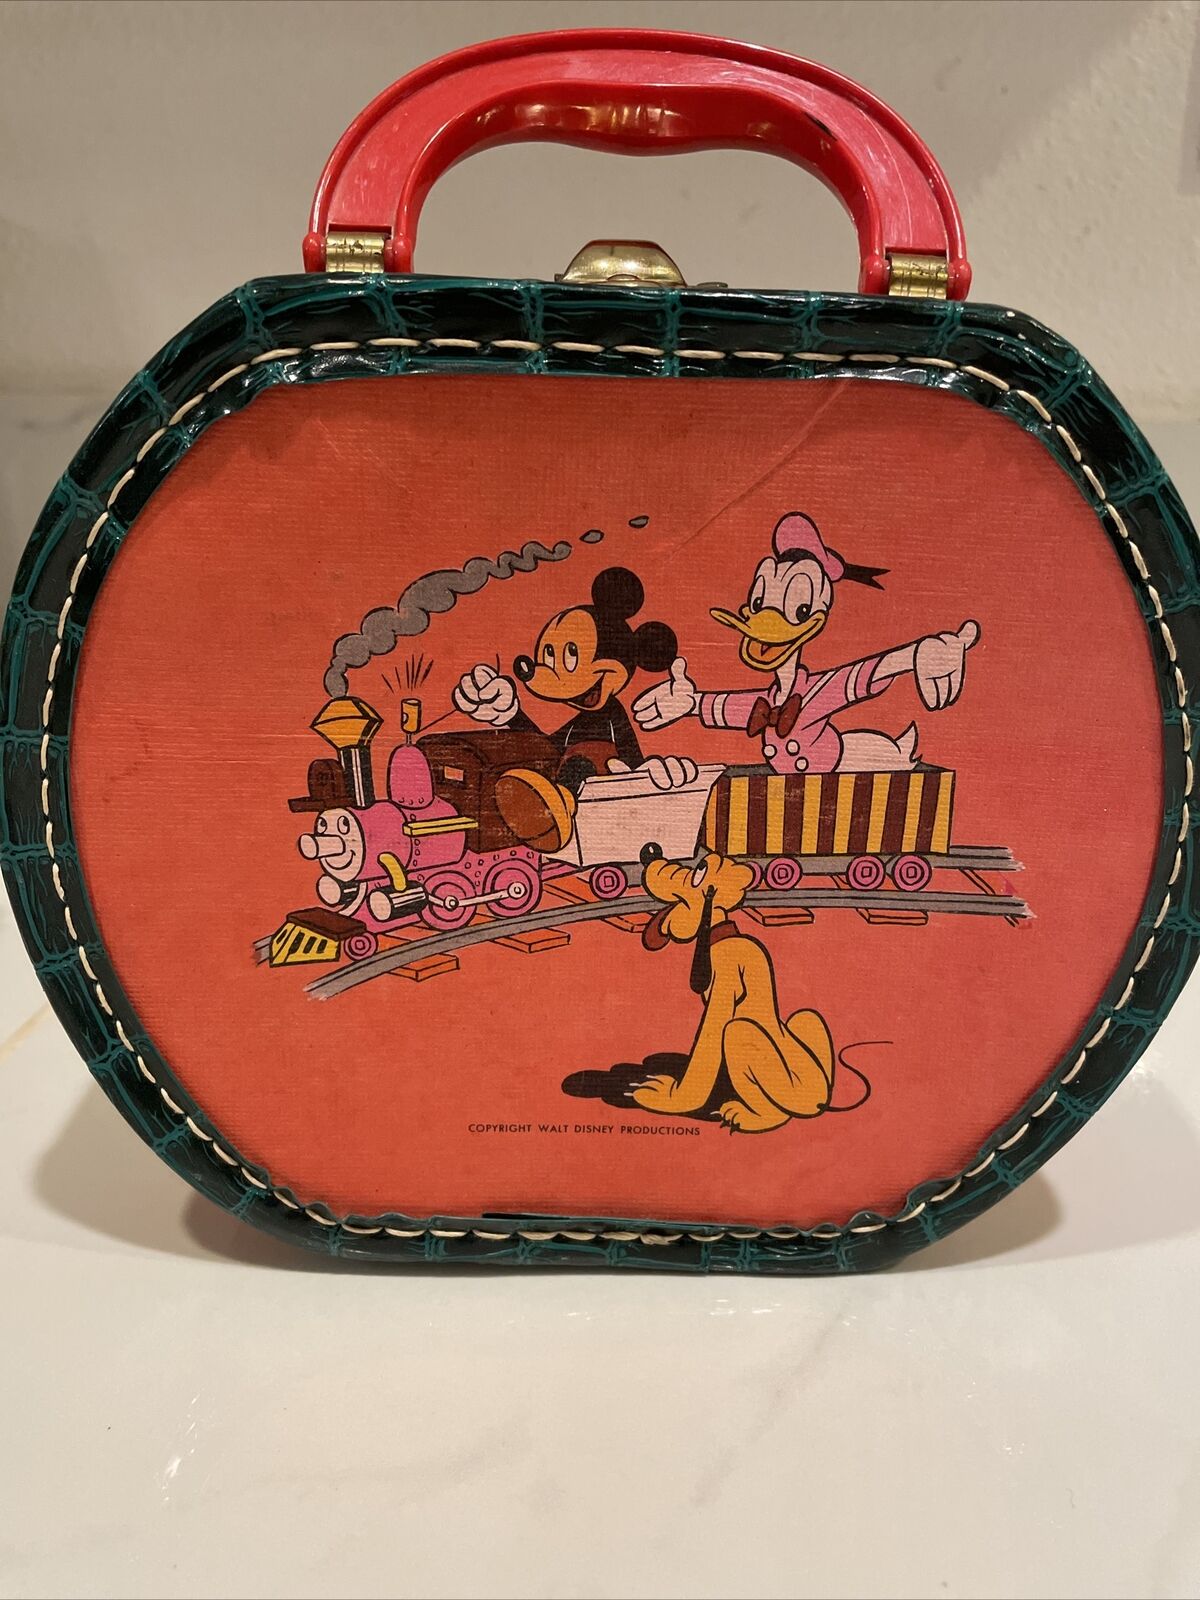 Vintage Disney Mickey Mouse Donald Duck Suitcase Travel Bag Rare